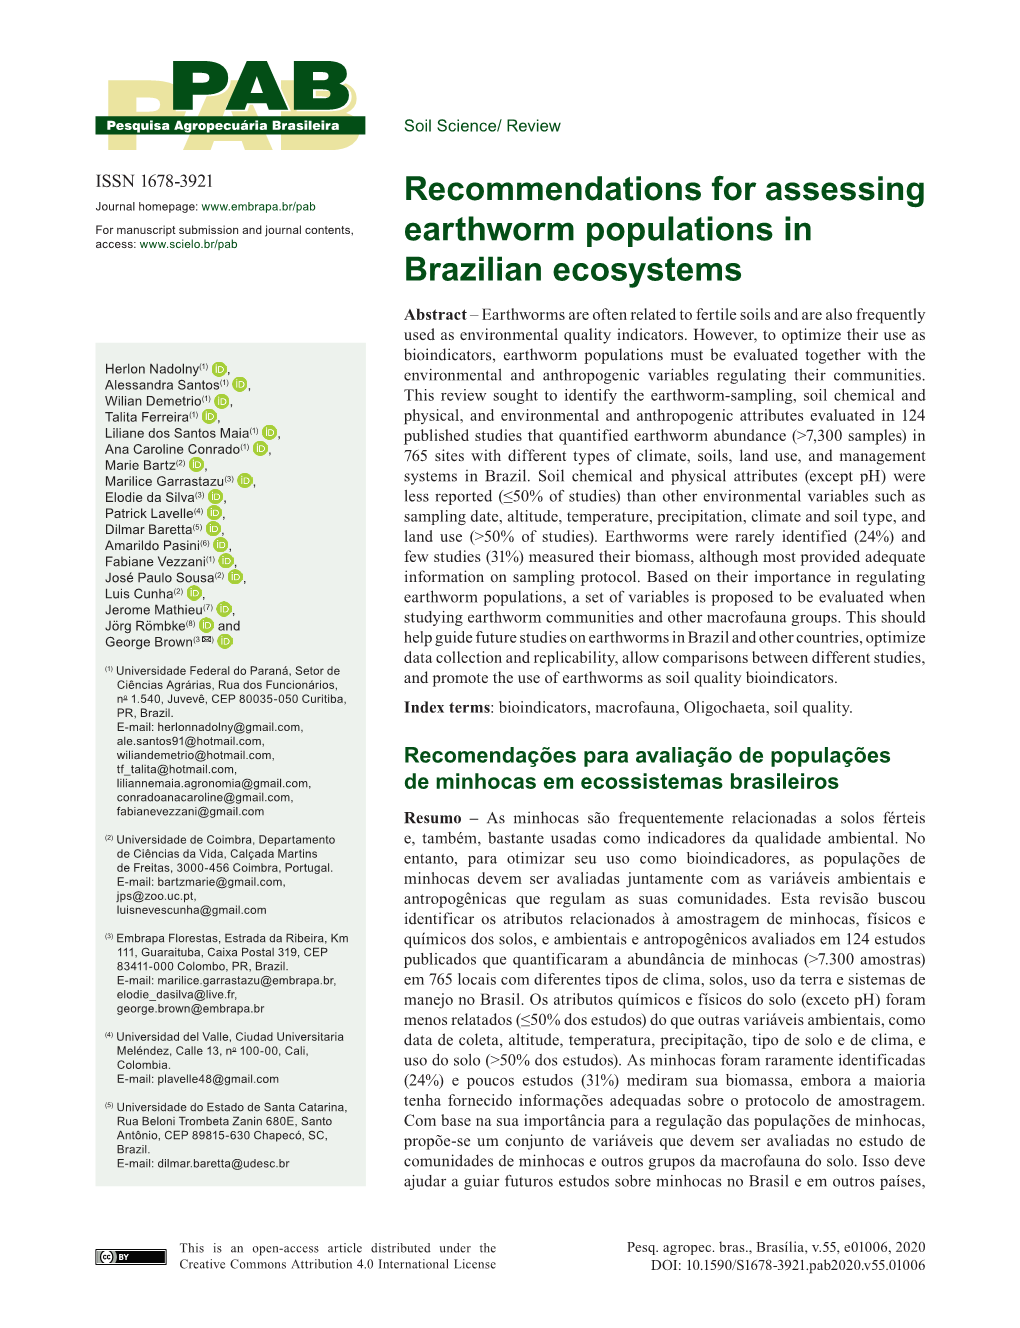 Recommendations for Assessing Earthworm Populations in Brazilian Ecosystems